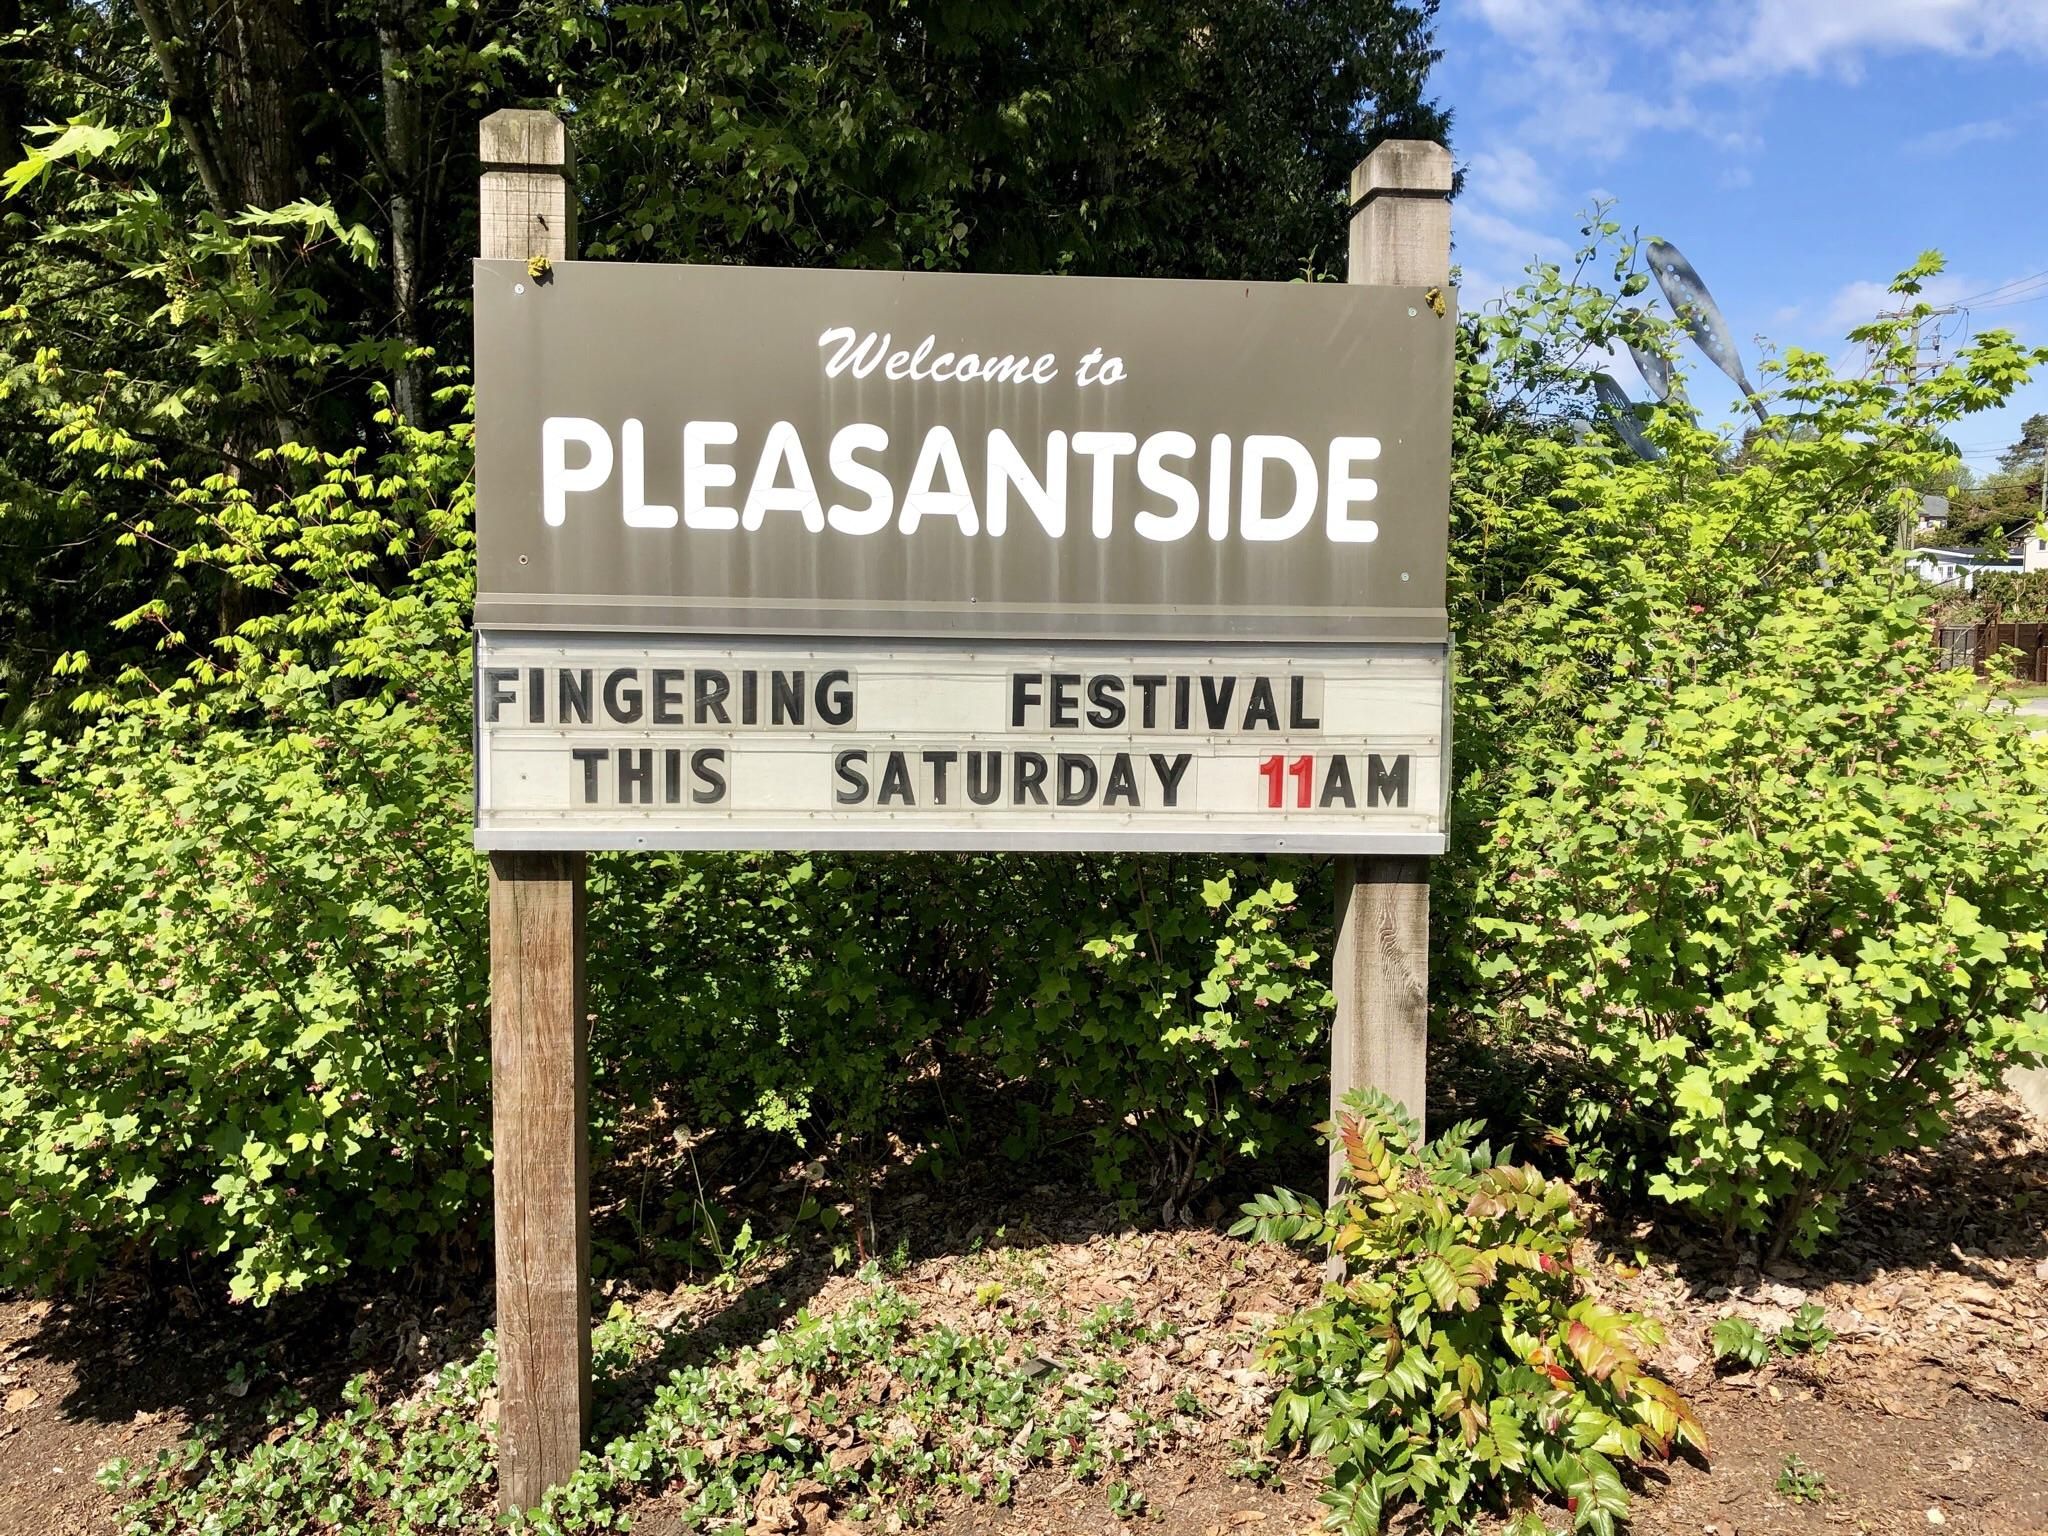 My town has the best festivals...